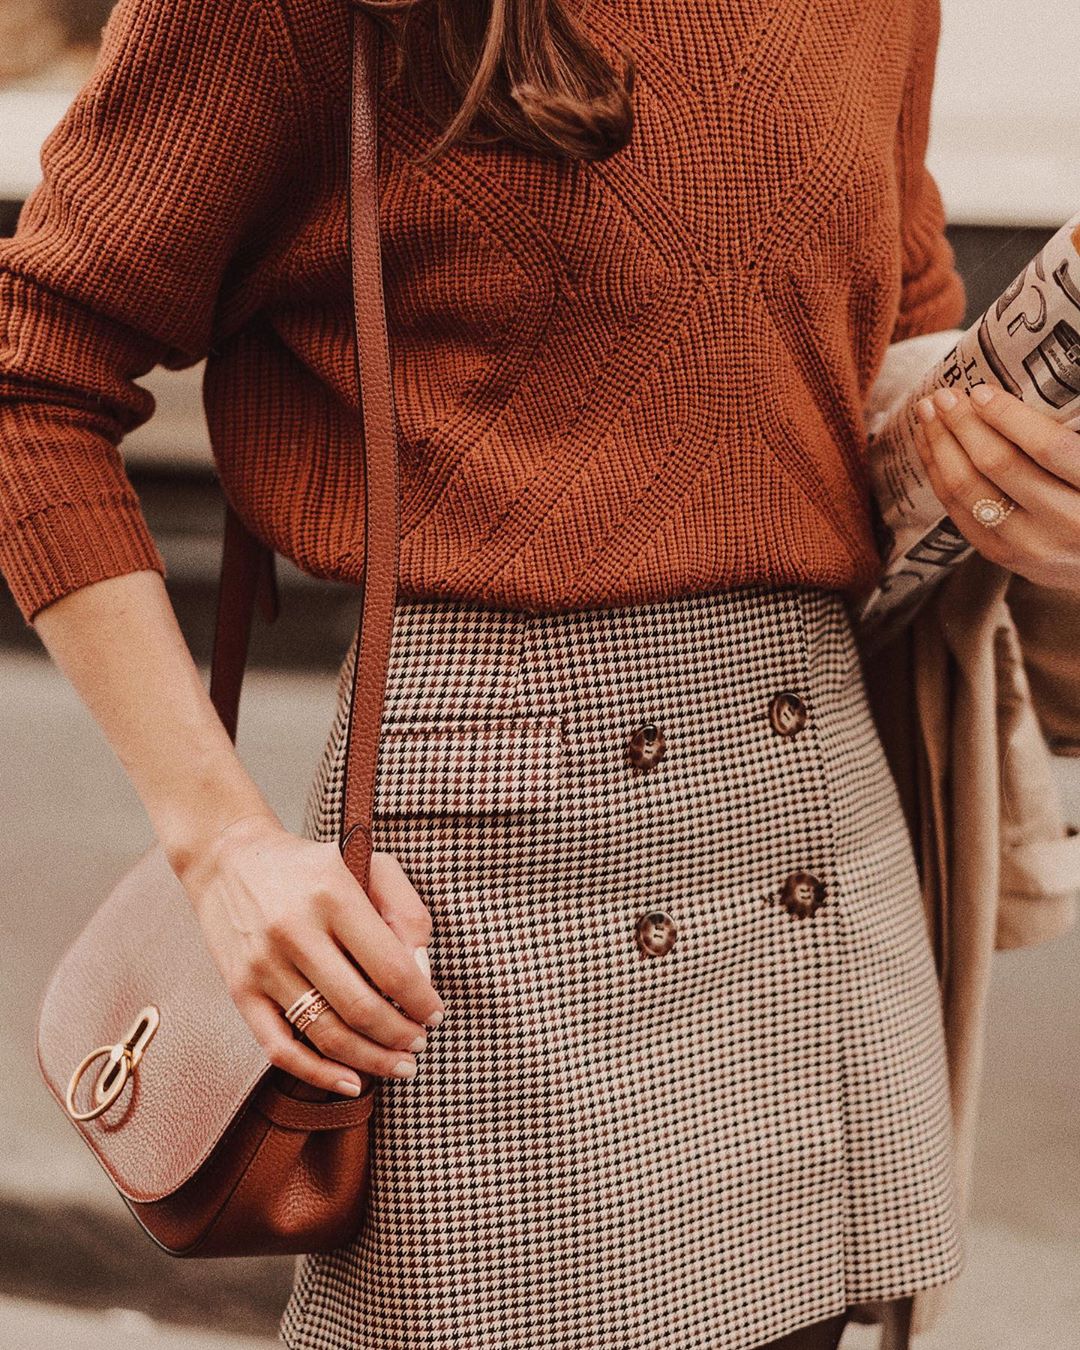 Links + Loves: A Simple Way to Research Your Ballot + 2 Skirts for Fall